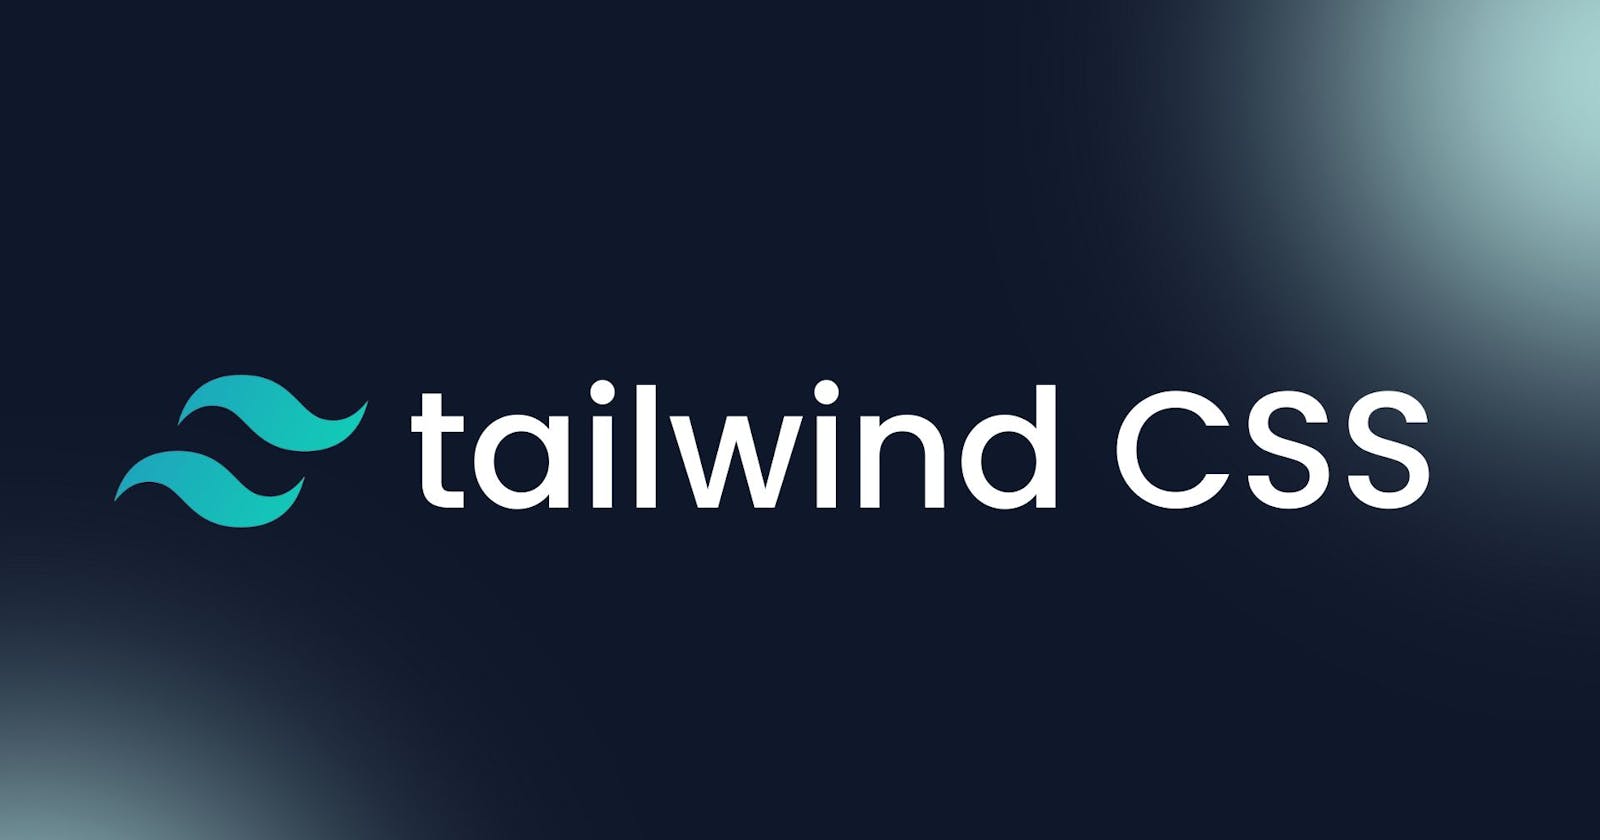 Getting Started with - Tailwind CSS